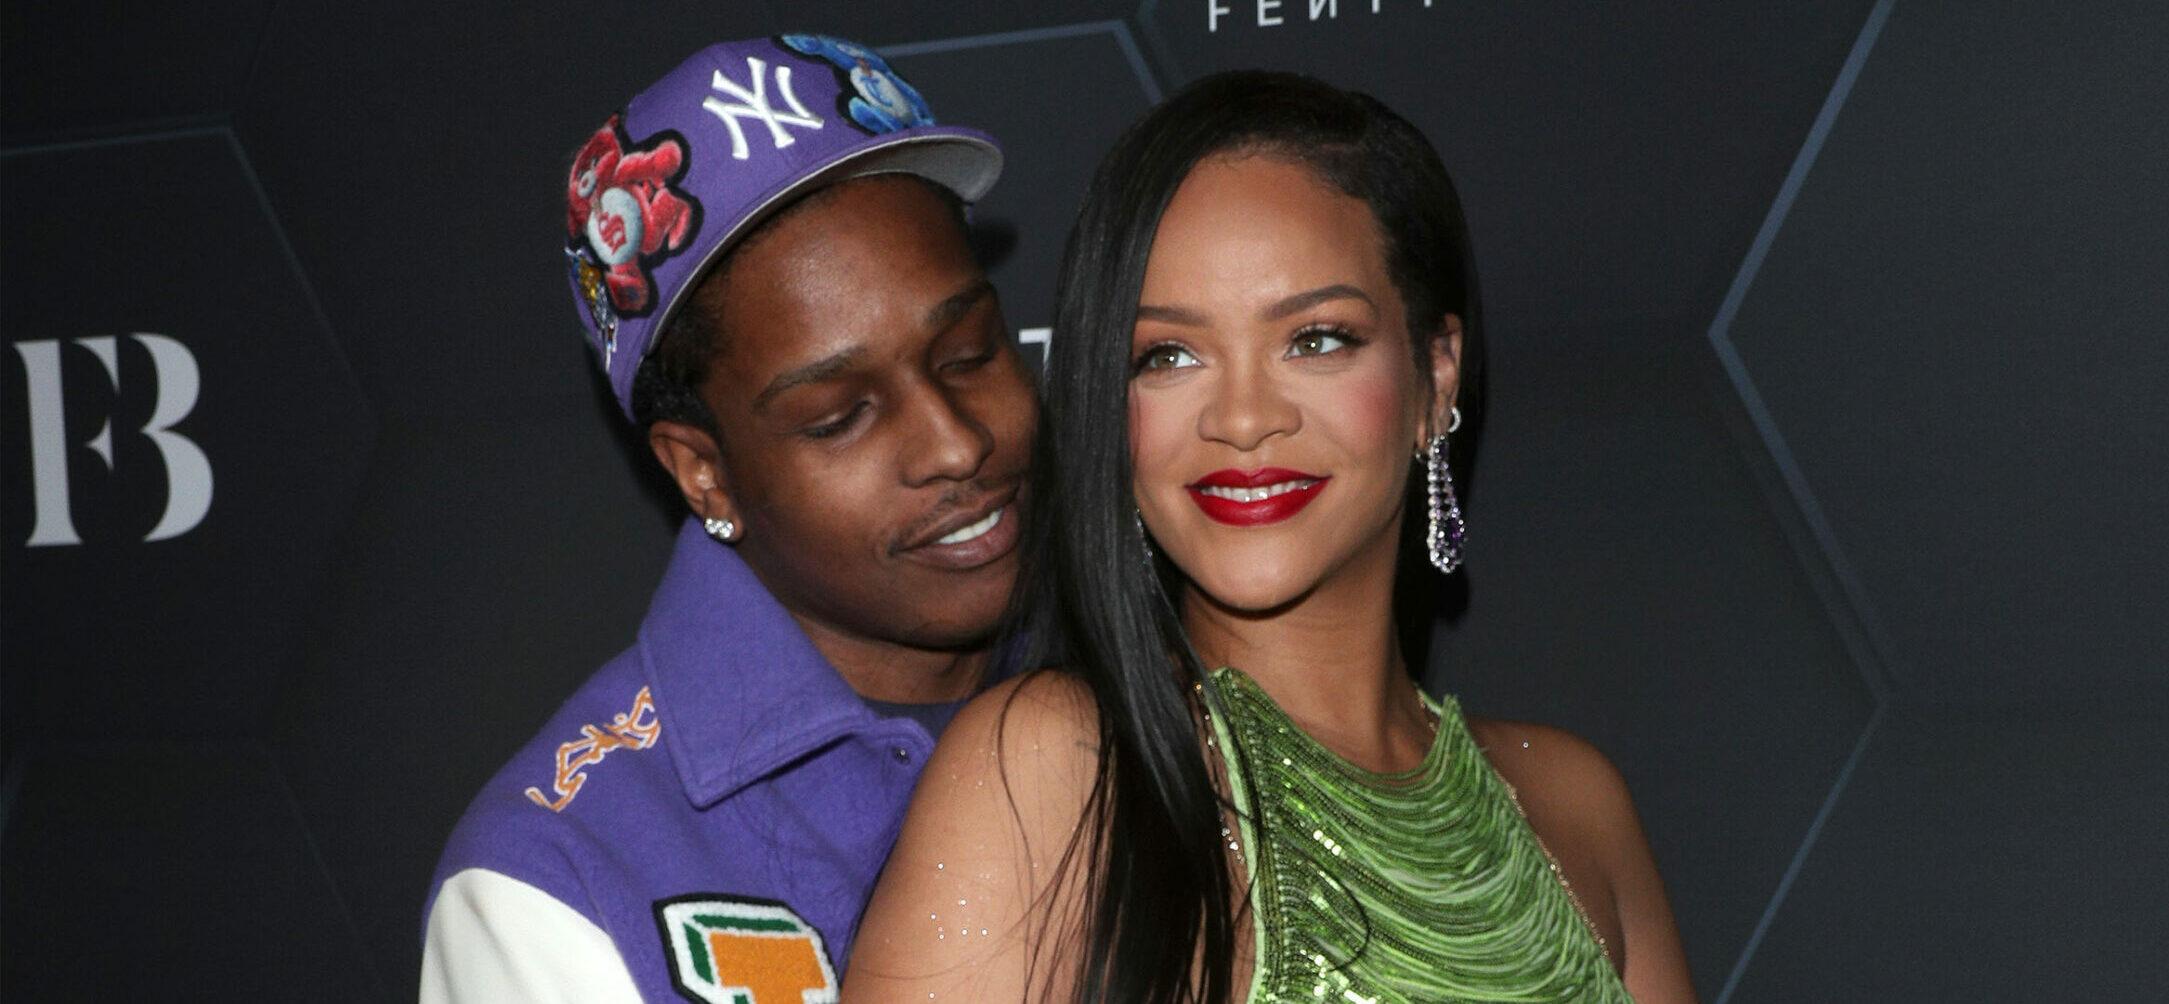 Rihanna Dotes On ‘Bajan Boyz’ A$AP Rocky & RZA While Counting Down To Due Date In Hometown